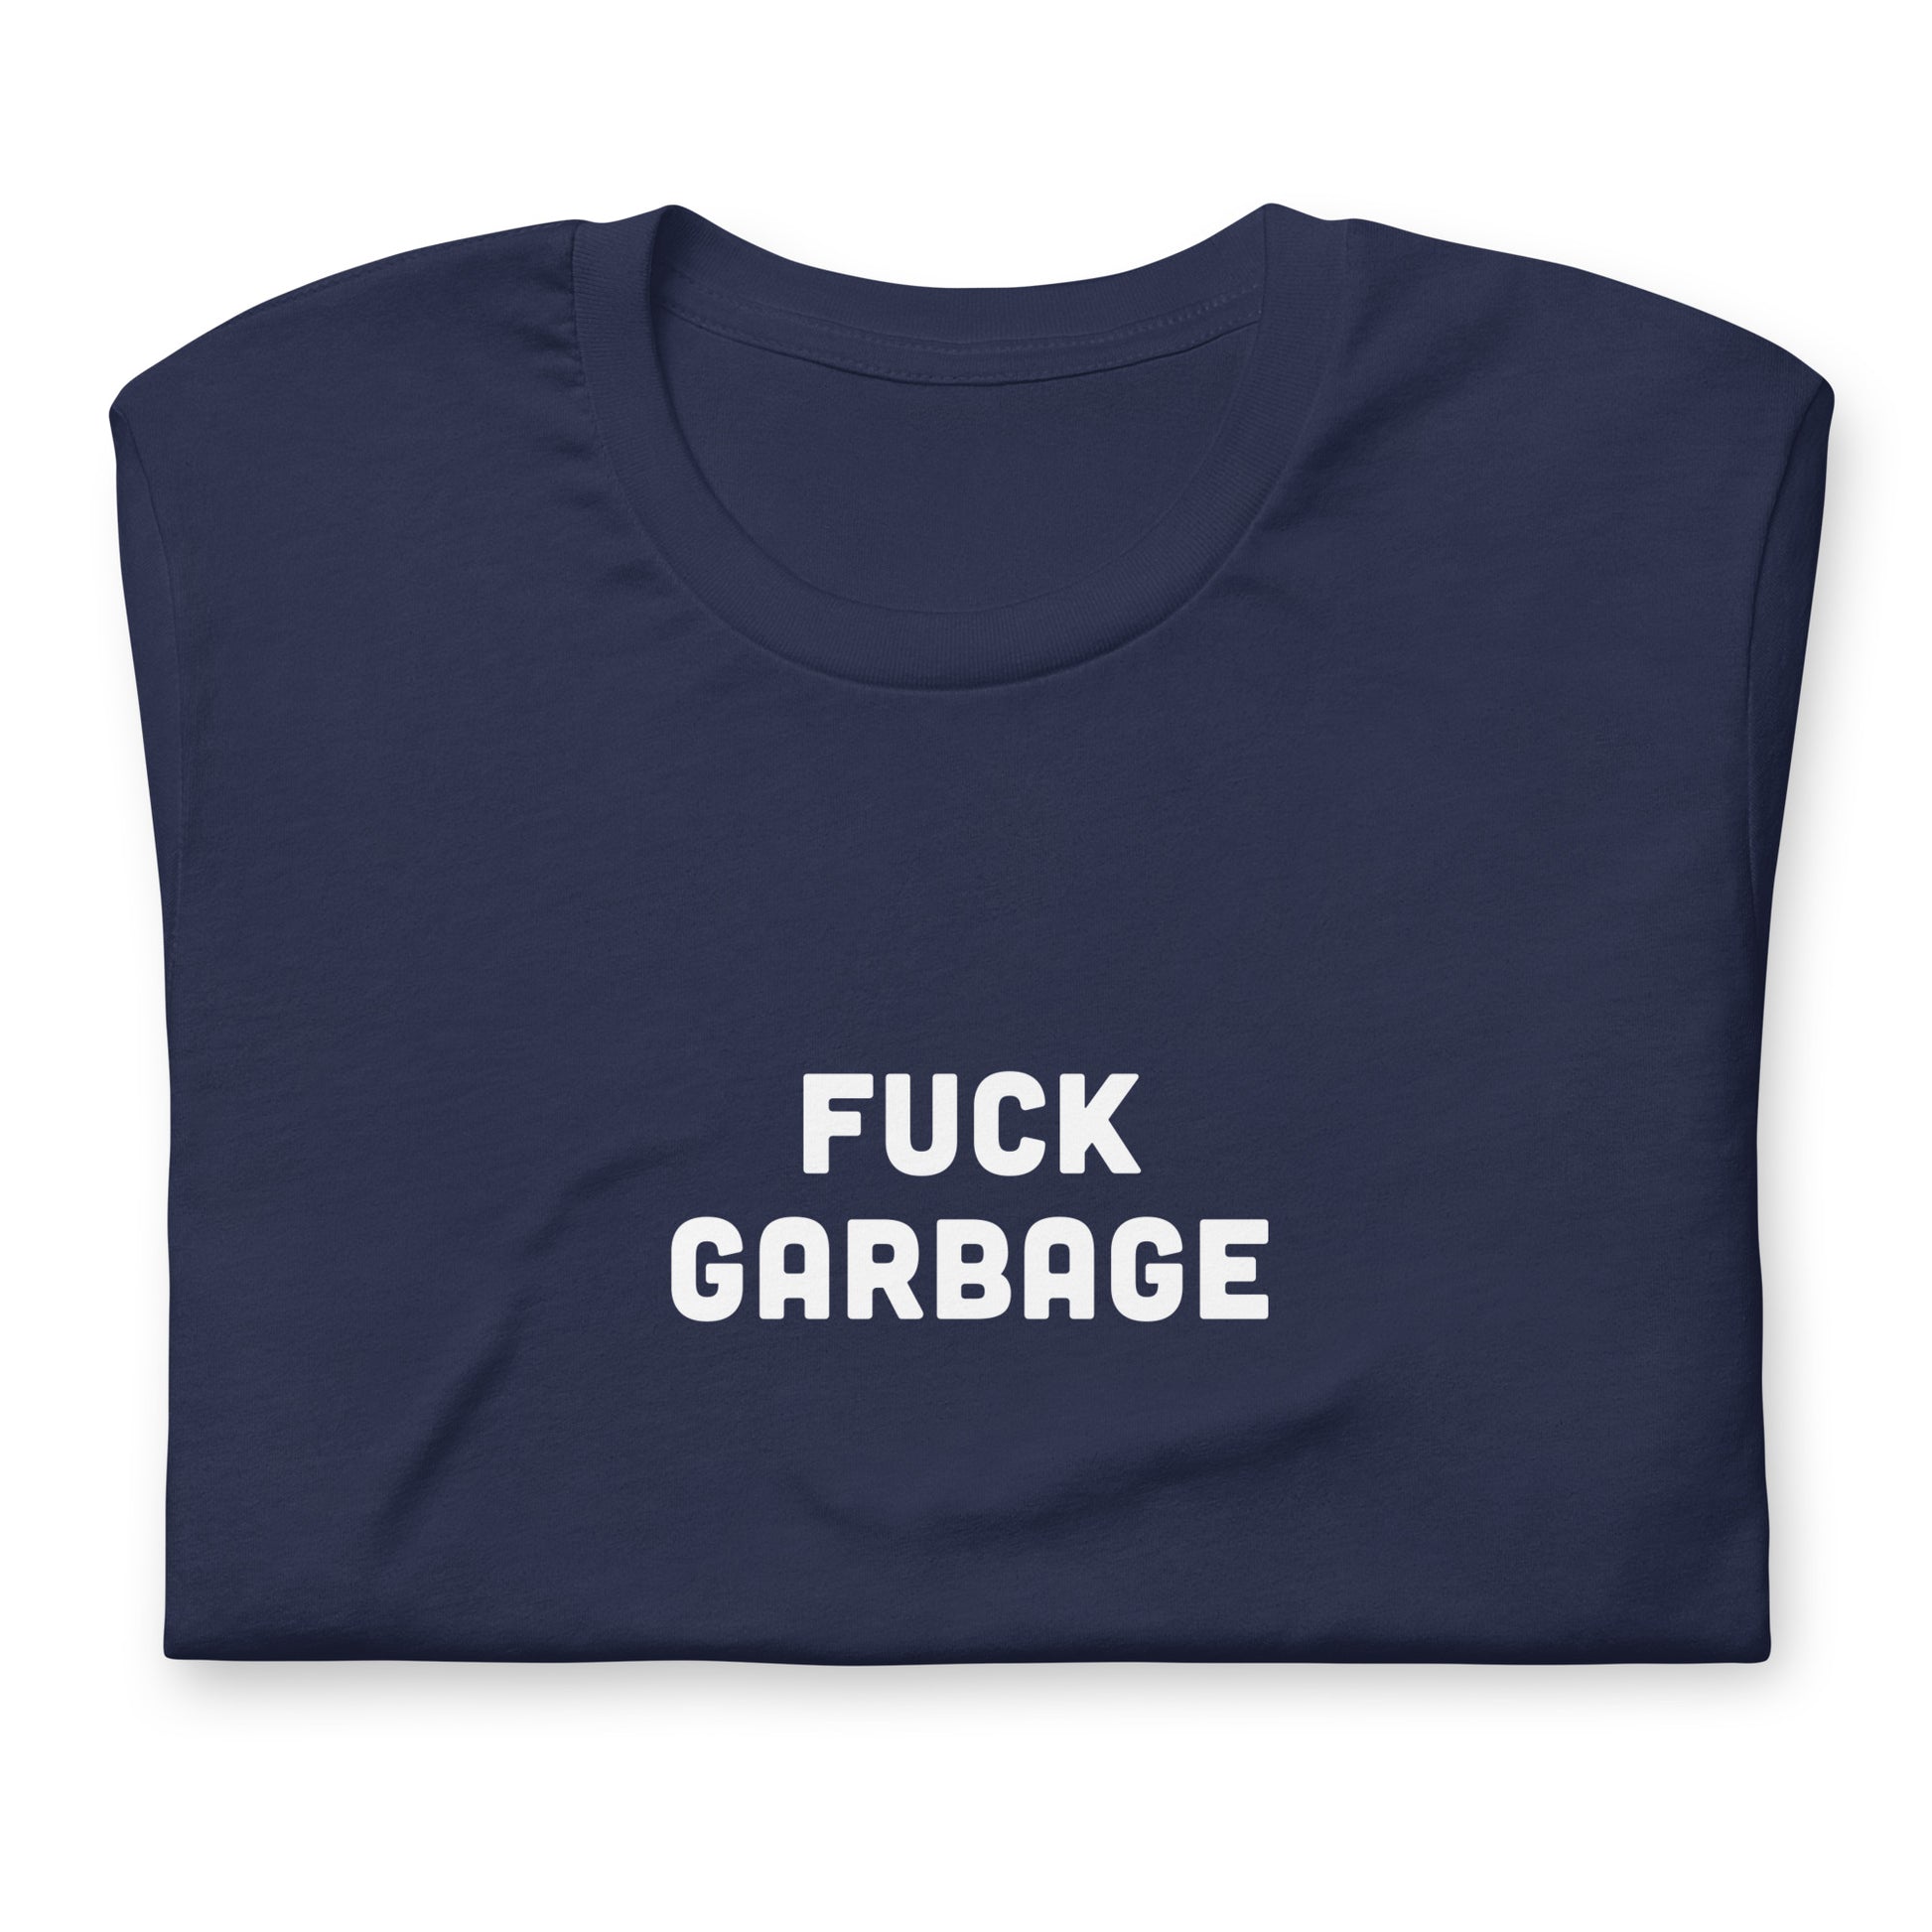 Fuck Garbage T-Shirt Size S Color Black